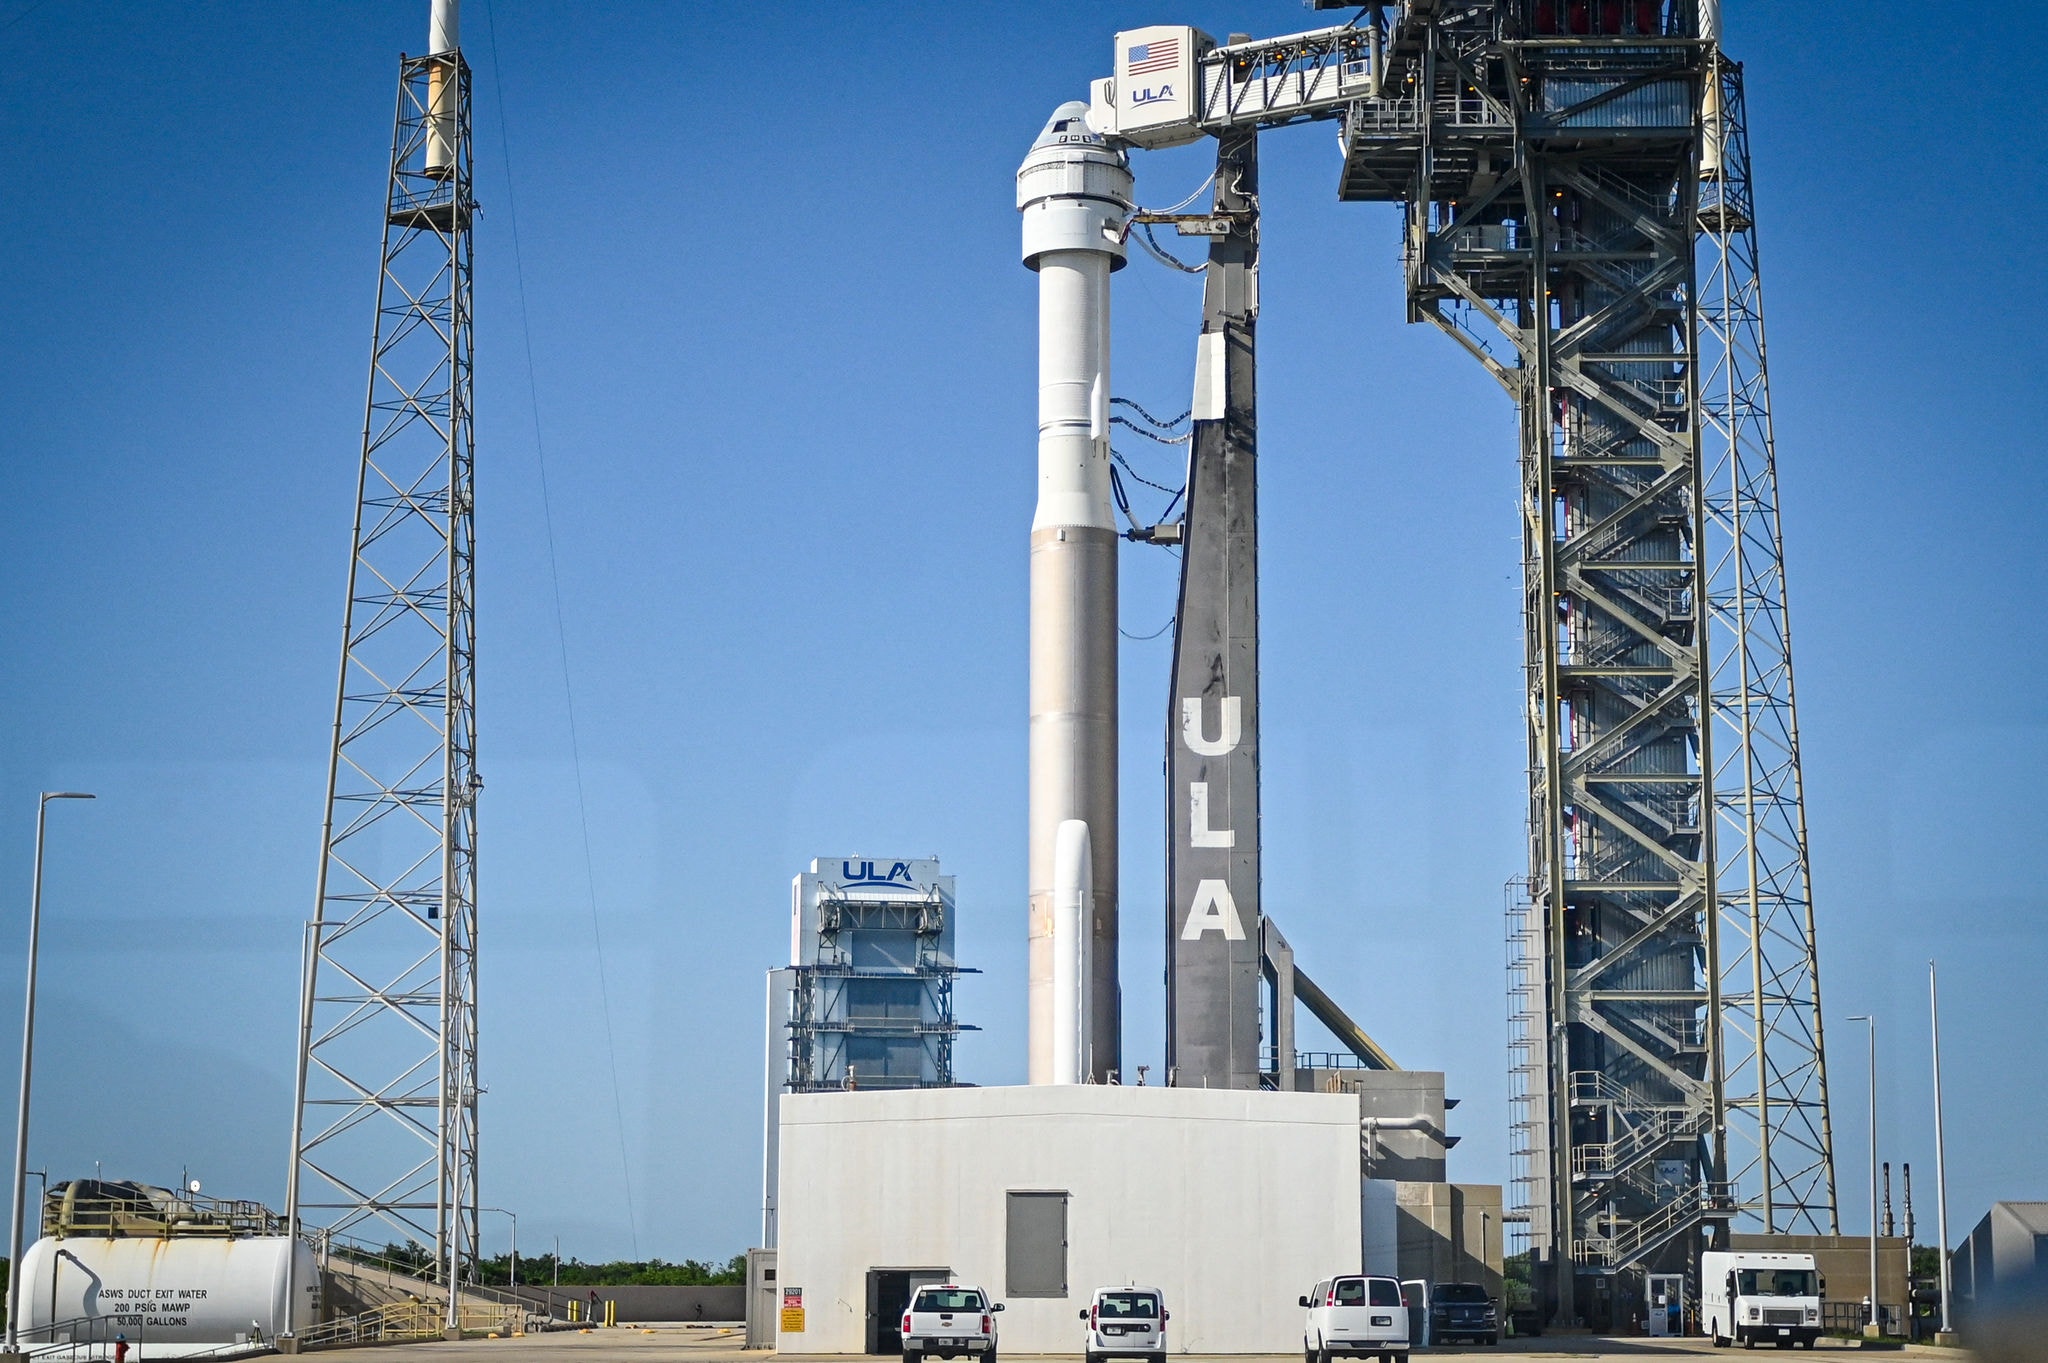 The United Launch Alliance (ULA) Atlas V rocket with Boeing's CST-100 Starliner spacecraft sits to Space Launch Complex 41 at Cape Canaveral Space Force Station Kennedy Space Center in Florida, on May 31, 2024. After years of delays, Boeing's Starliner spaceship is finally set to ferry astronauts to the International Space Station on June 1, 2024, marking a crucial step for both the US aerospace giant and NASA's commercial outsourcing strategy. (Photo by Miguel J. Rodriguez Carrillo / AFP)